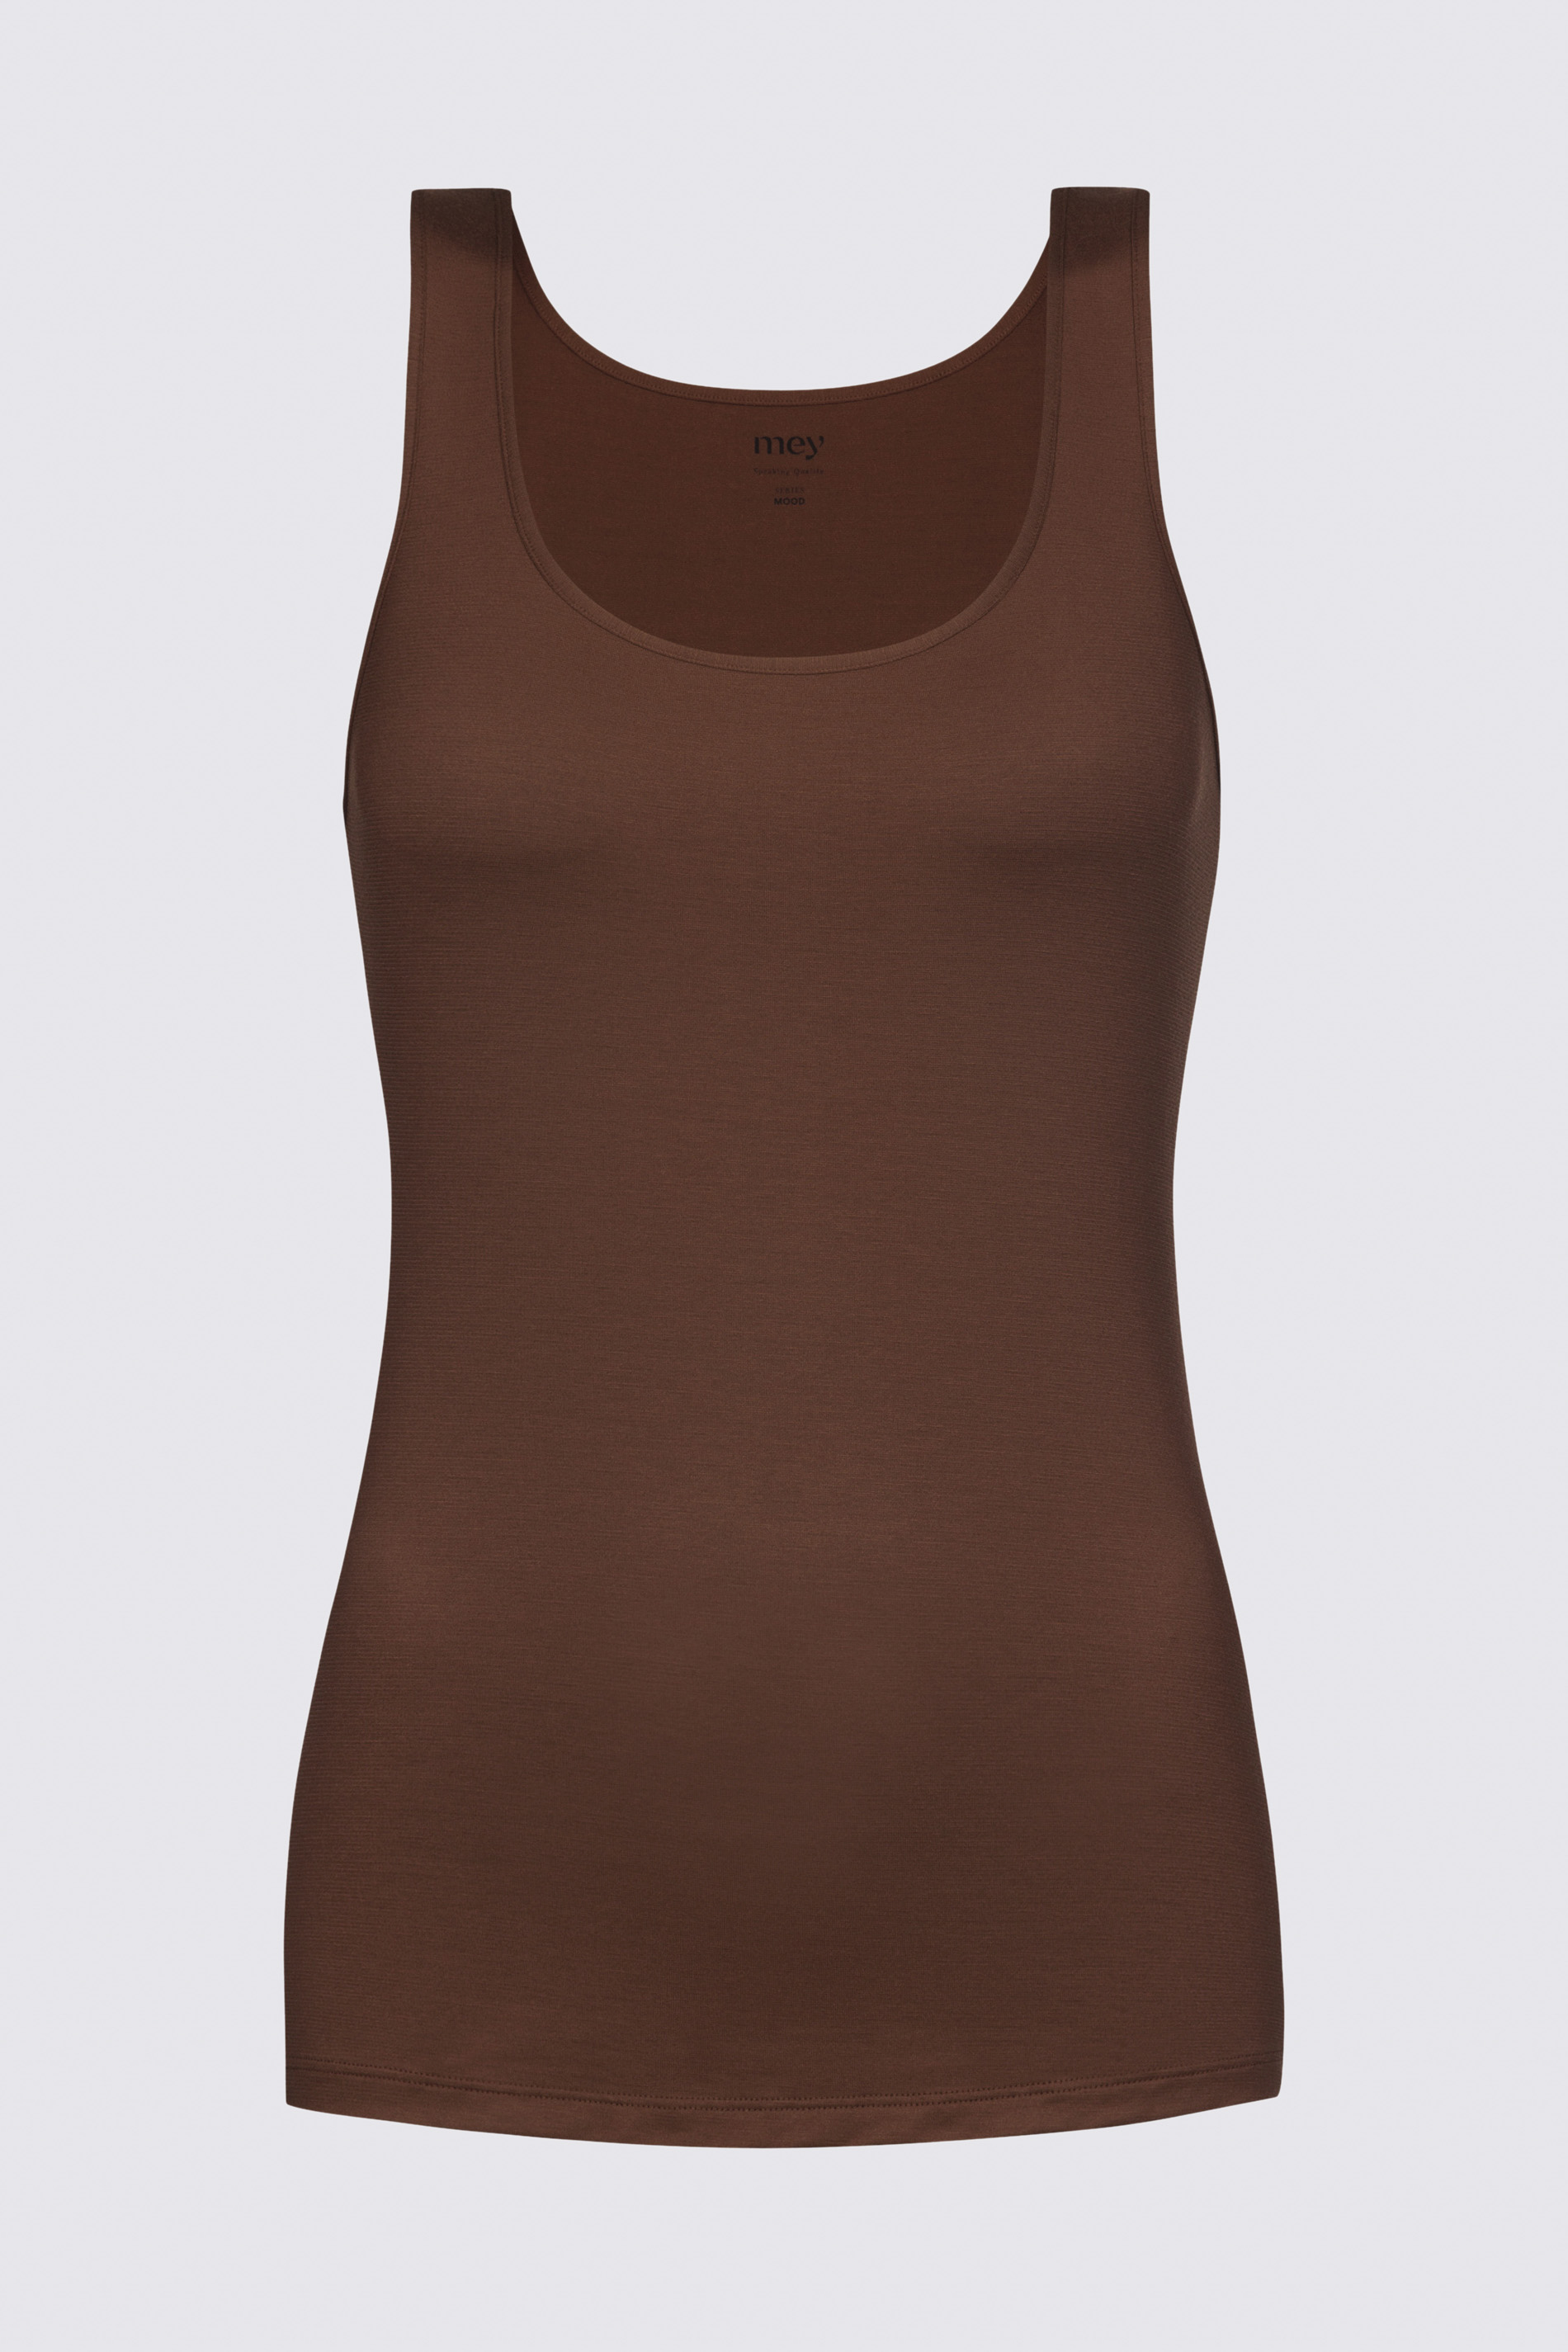 Top with wide straps Espresso Serie Mood Cut Out | mey®